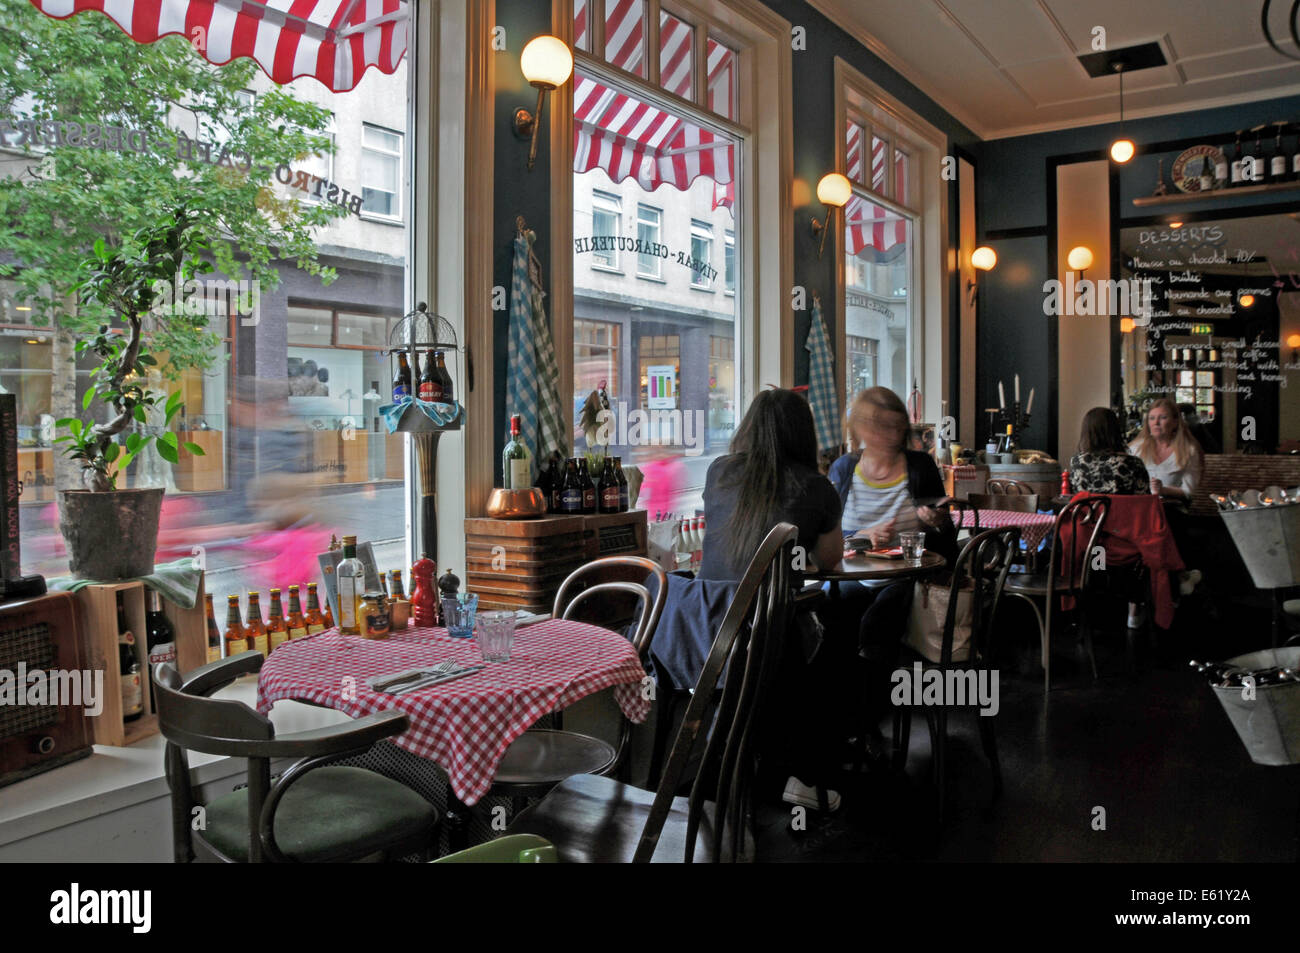 People, faces, restaurants and hair parlors along streets of Reykjavik in Iceland Stock Photo